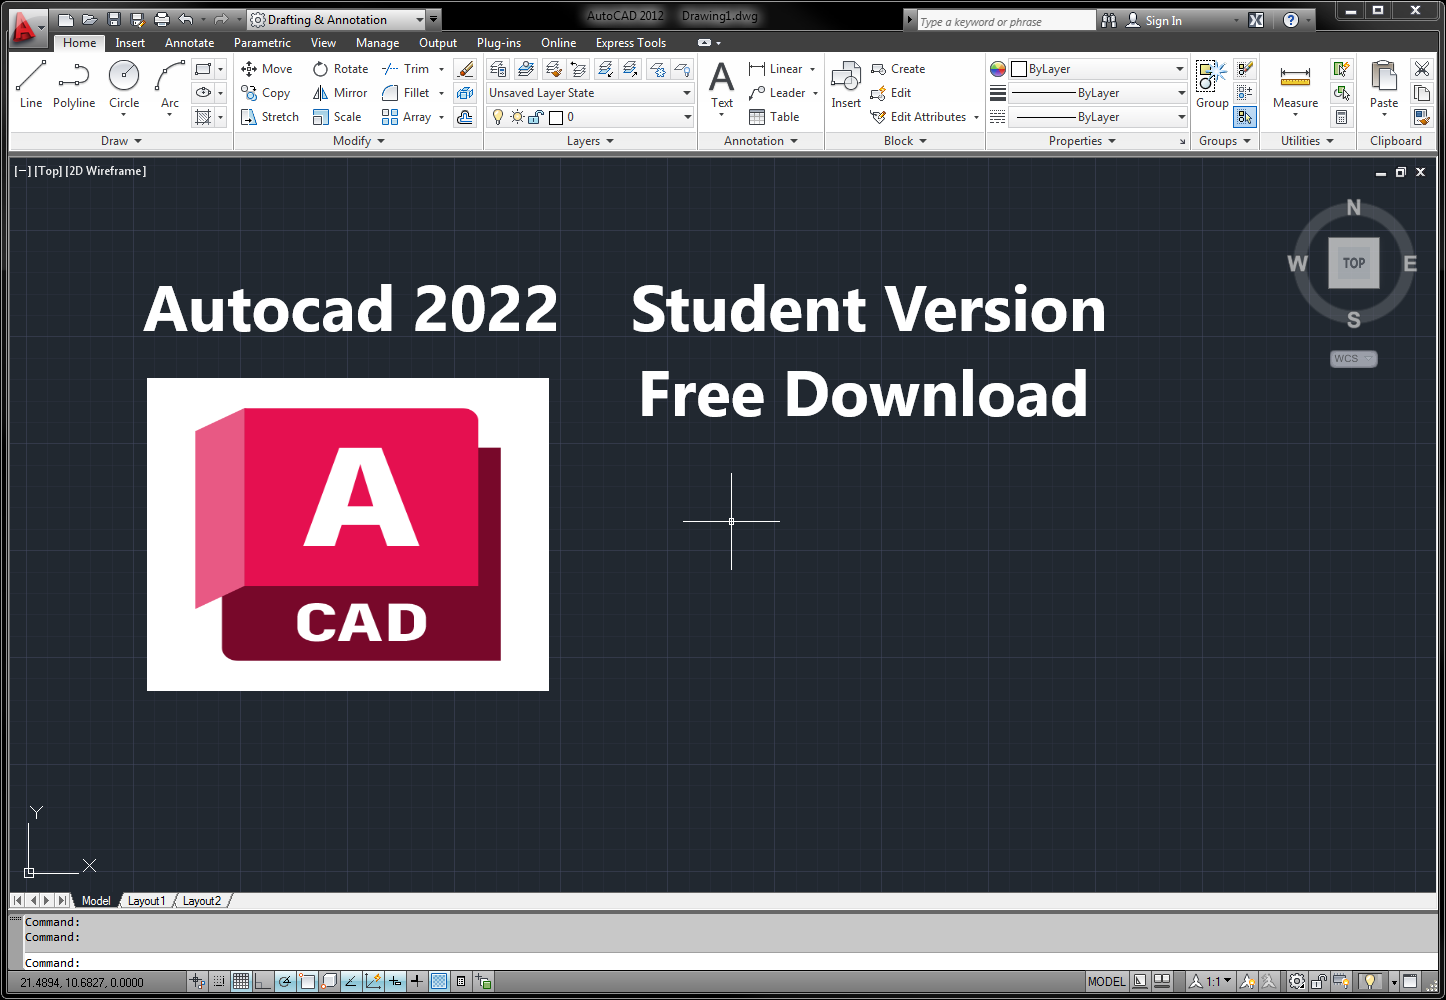 Autocad software free download student version how to download adobe pdf